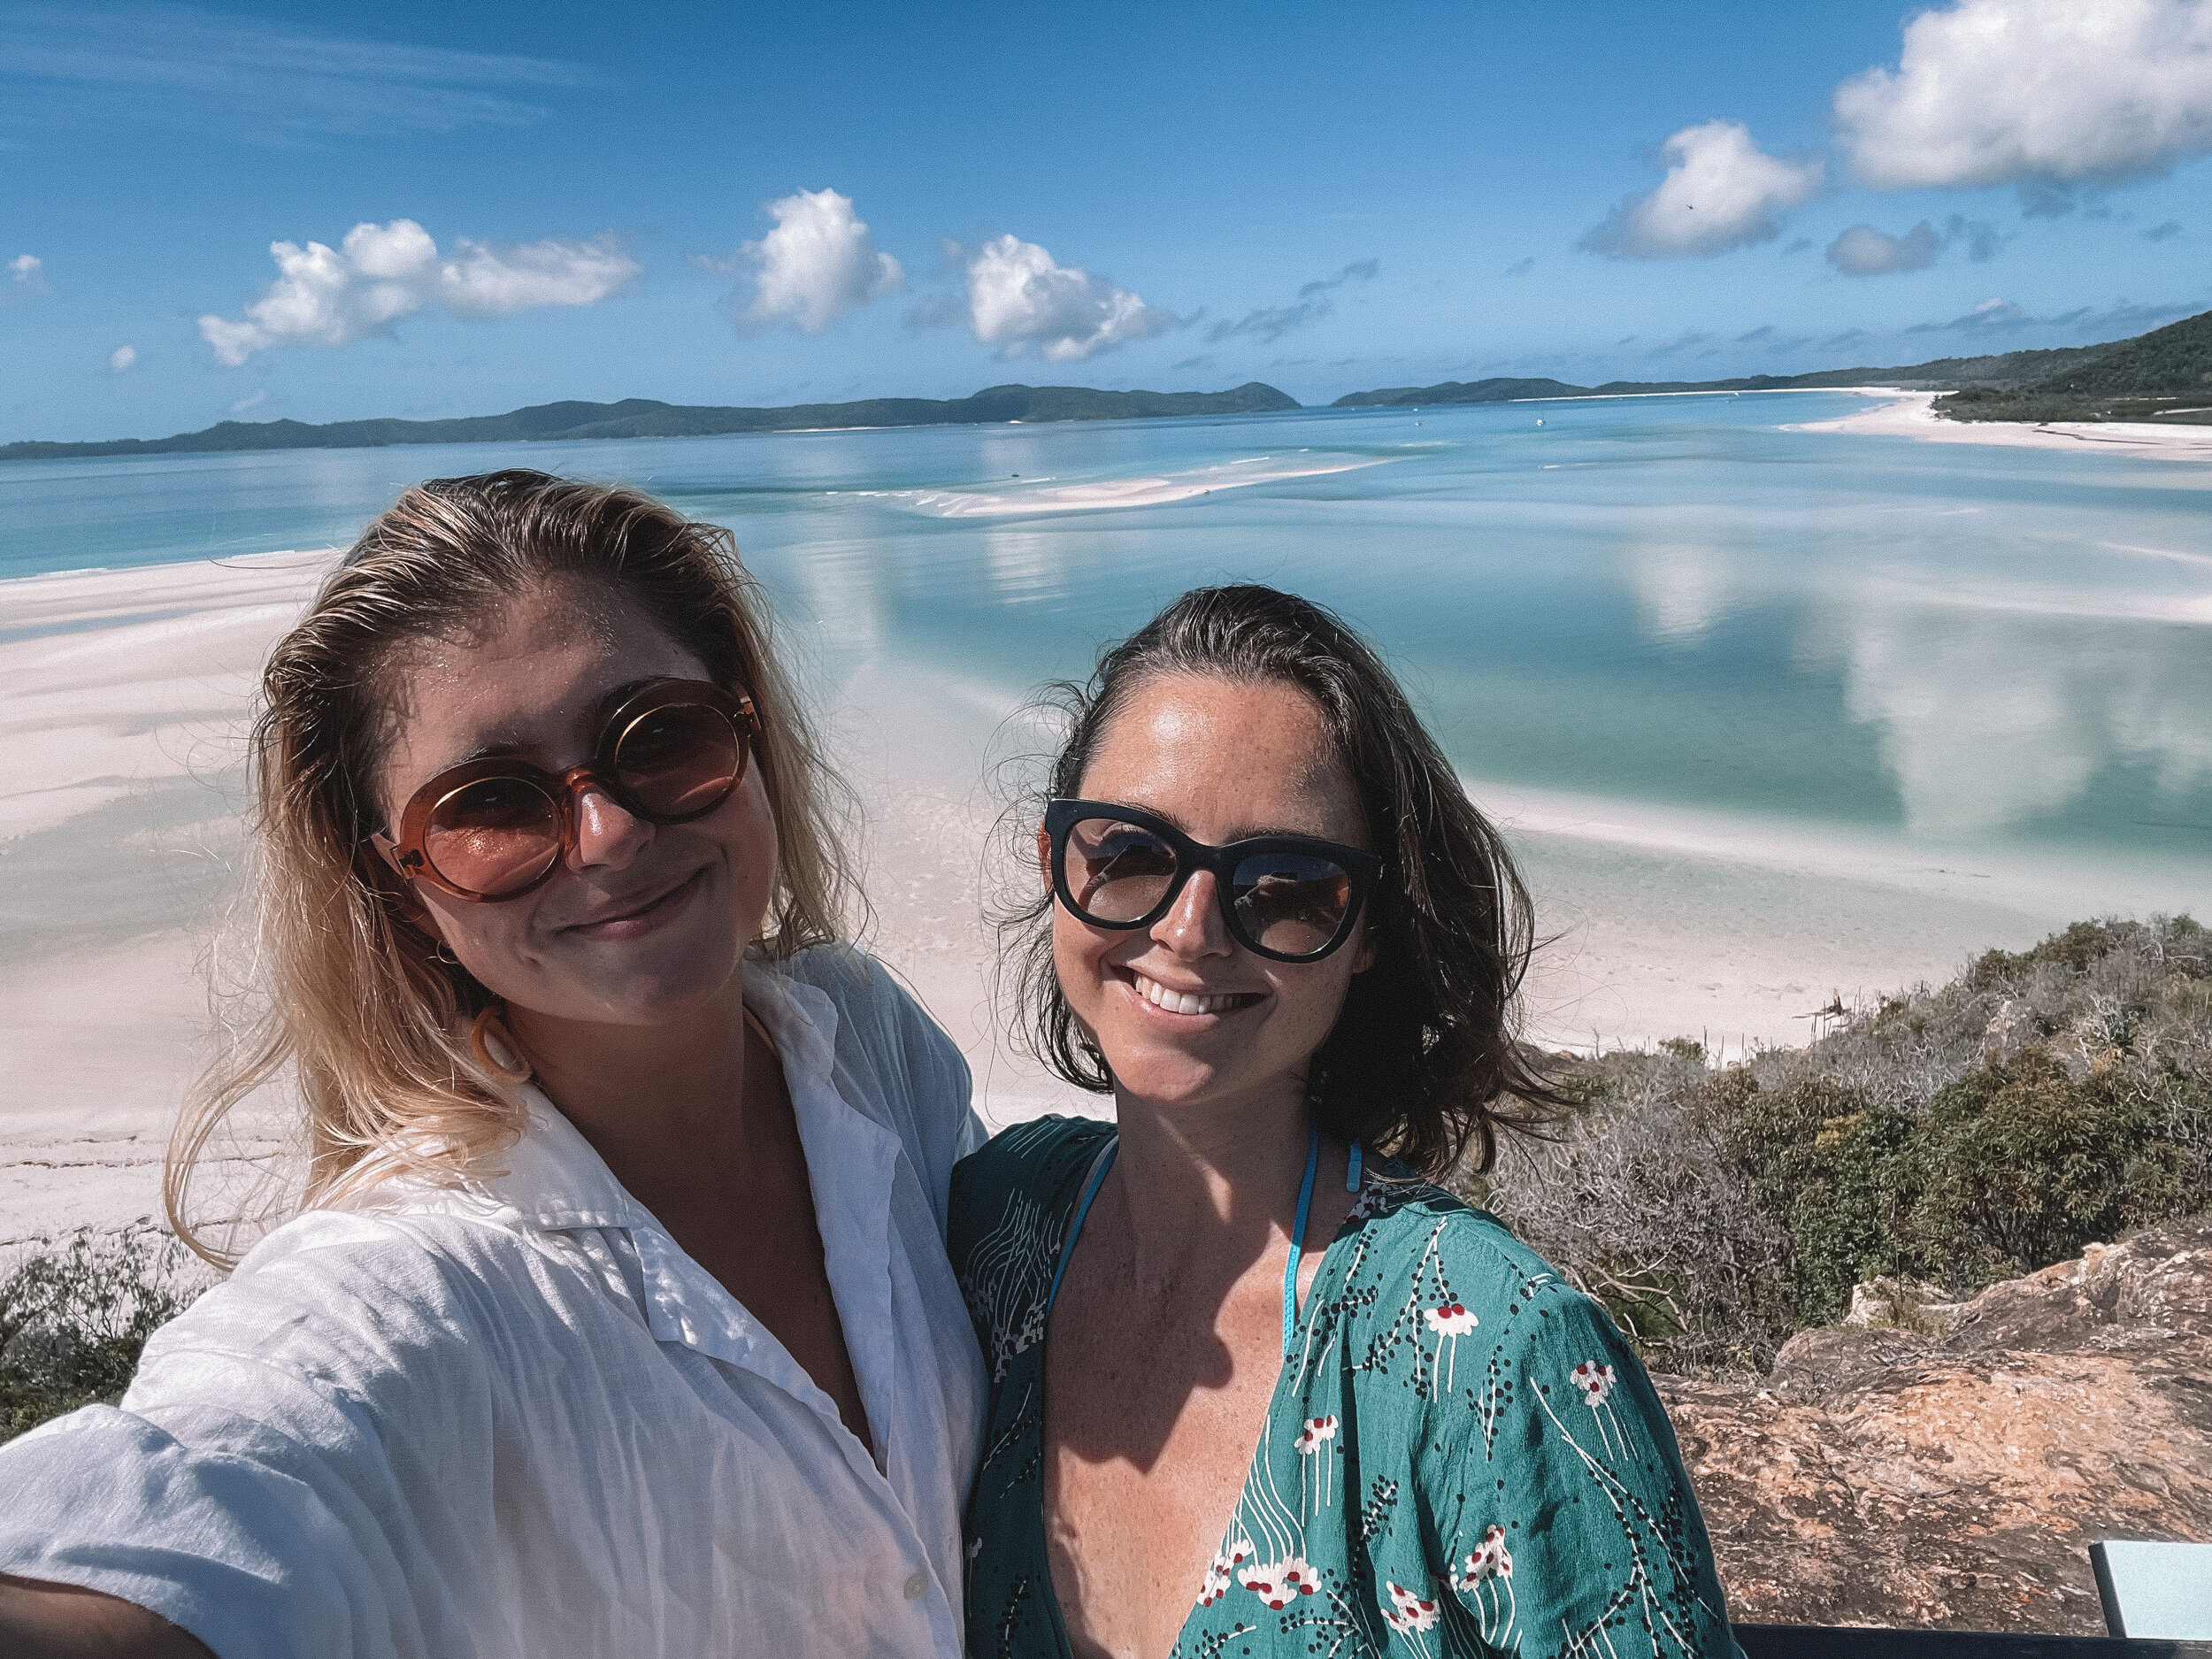 Capturing selfies at Hill Inlet Lookout - Whitsunday National Park - Airlie Beach - Tropical North Queensland (QLD) - Australia